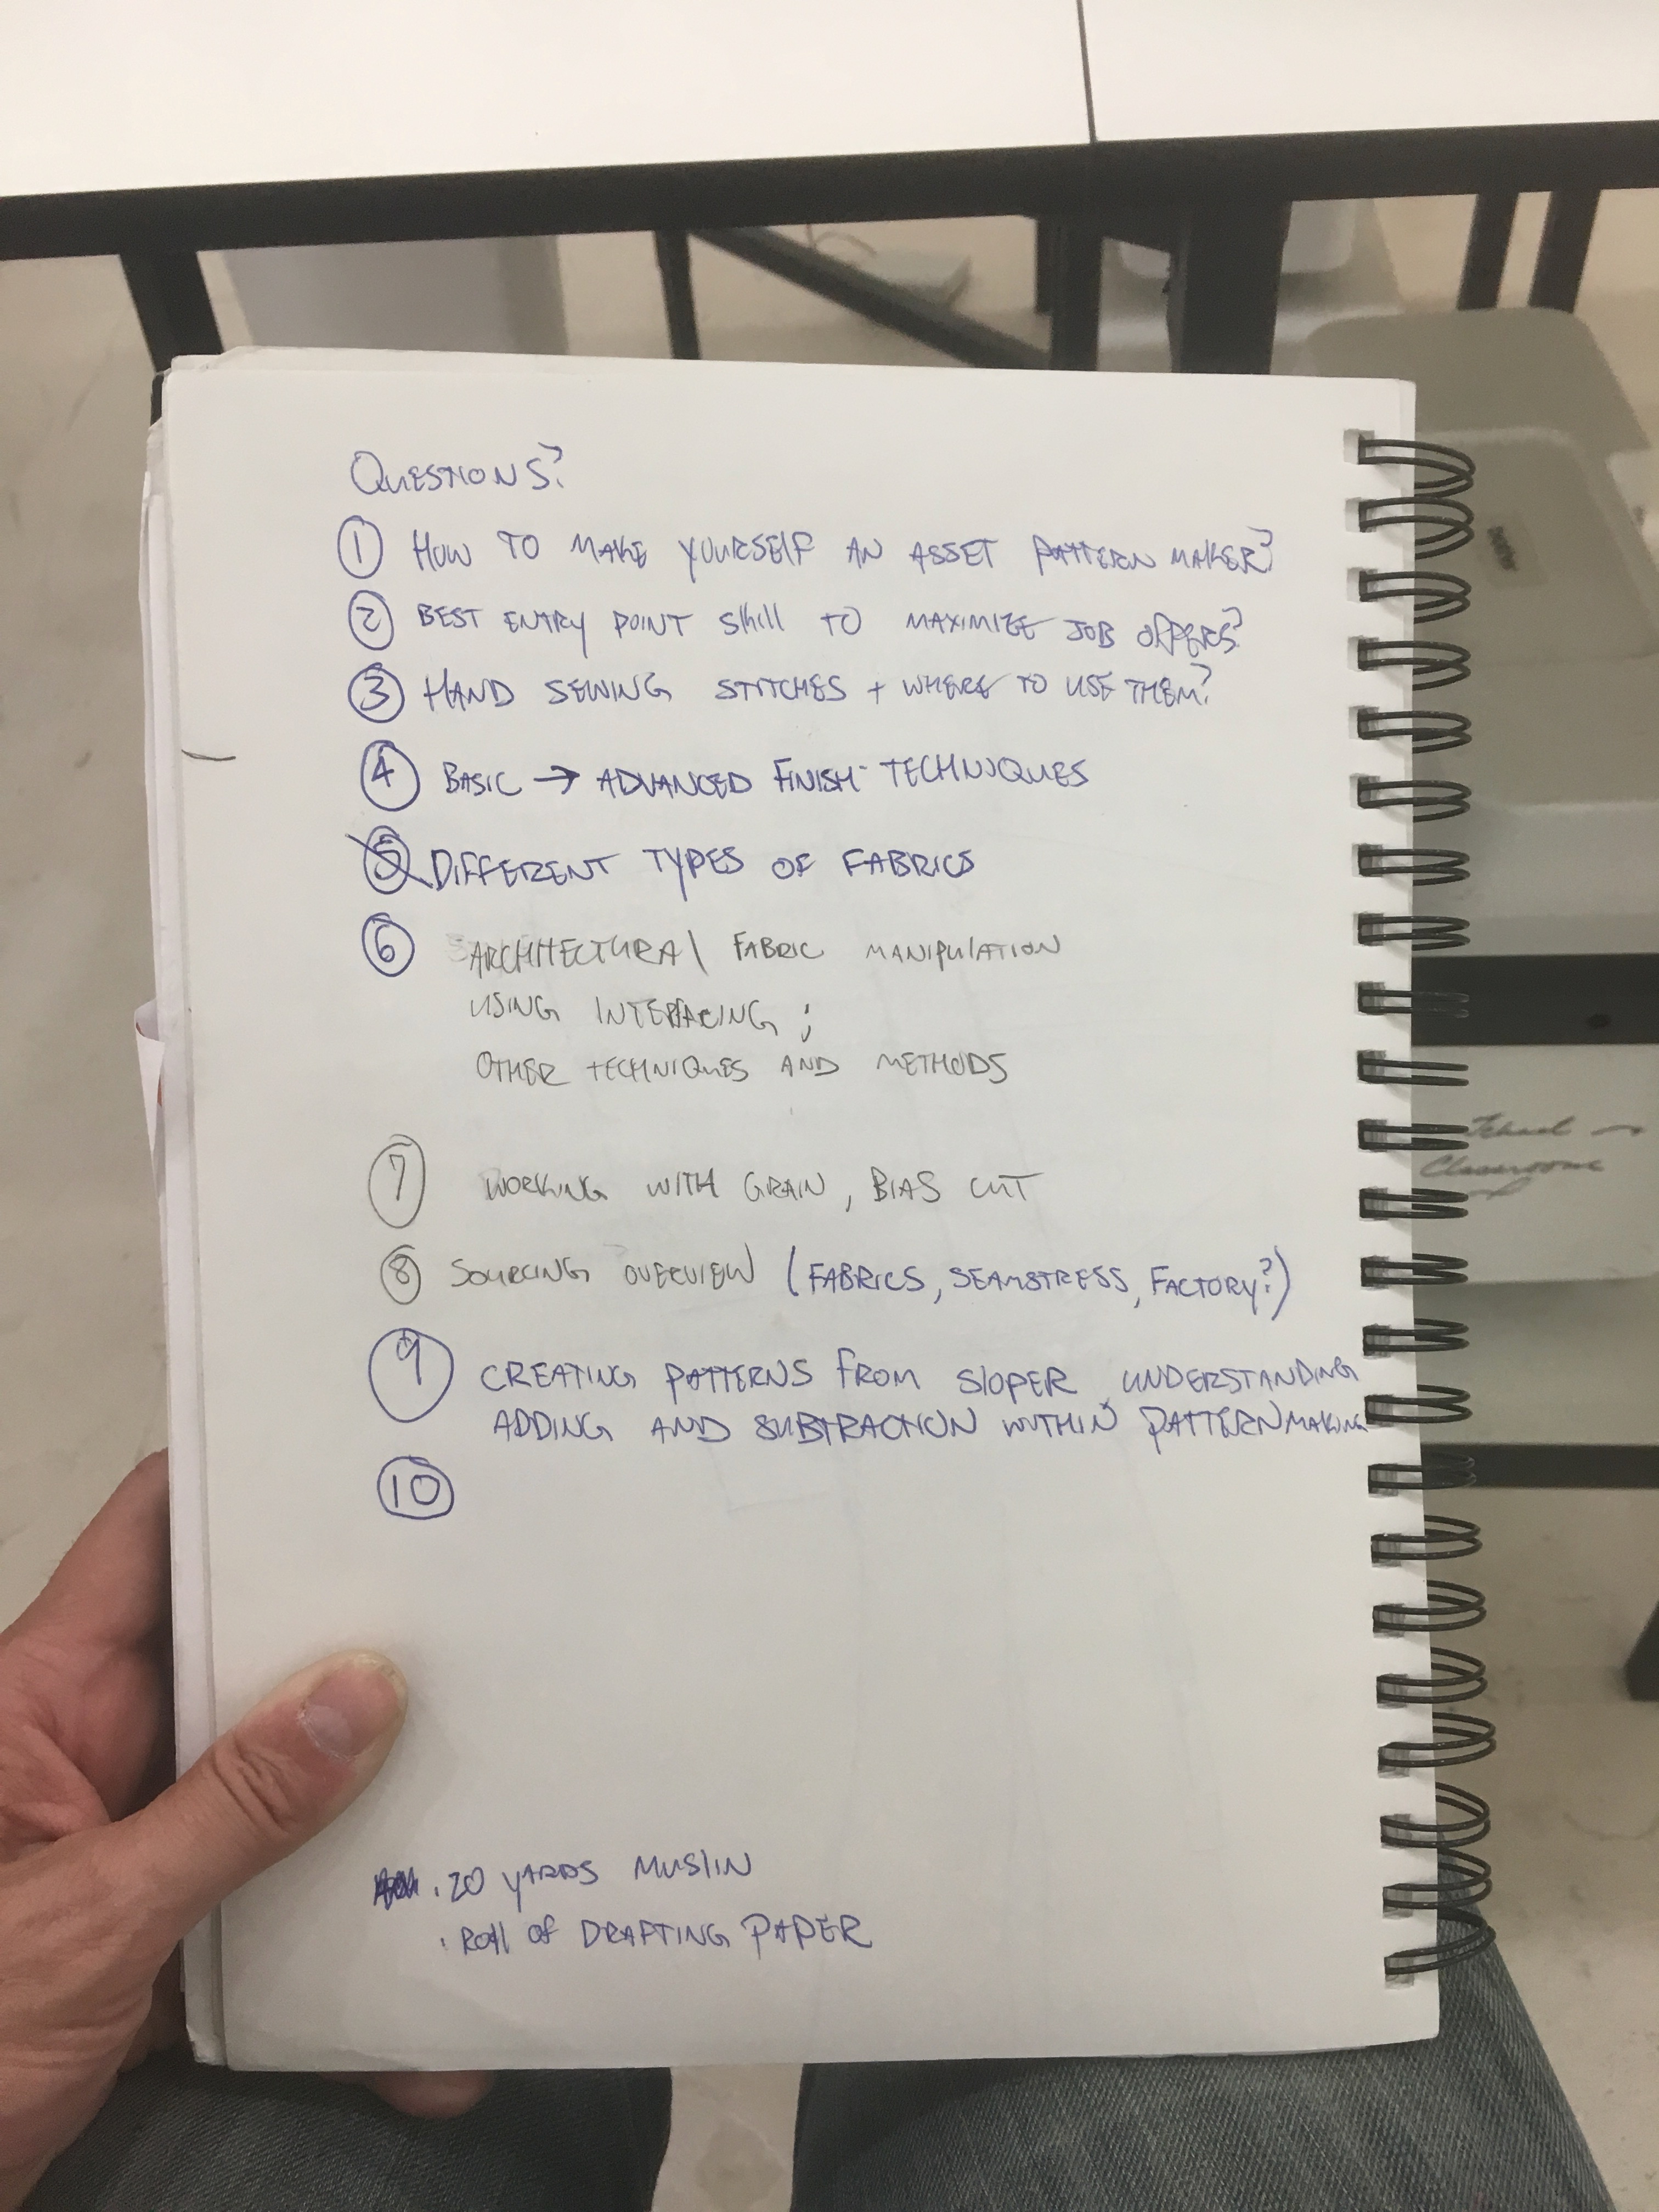 A list of questions that Carson brought to his first day of sewing classes at the Tchad workroom sewing studio in Chicago.